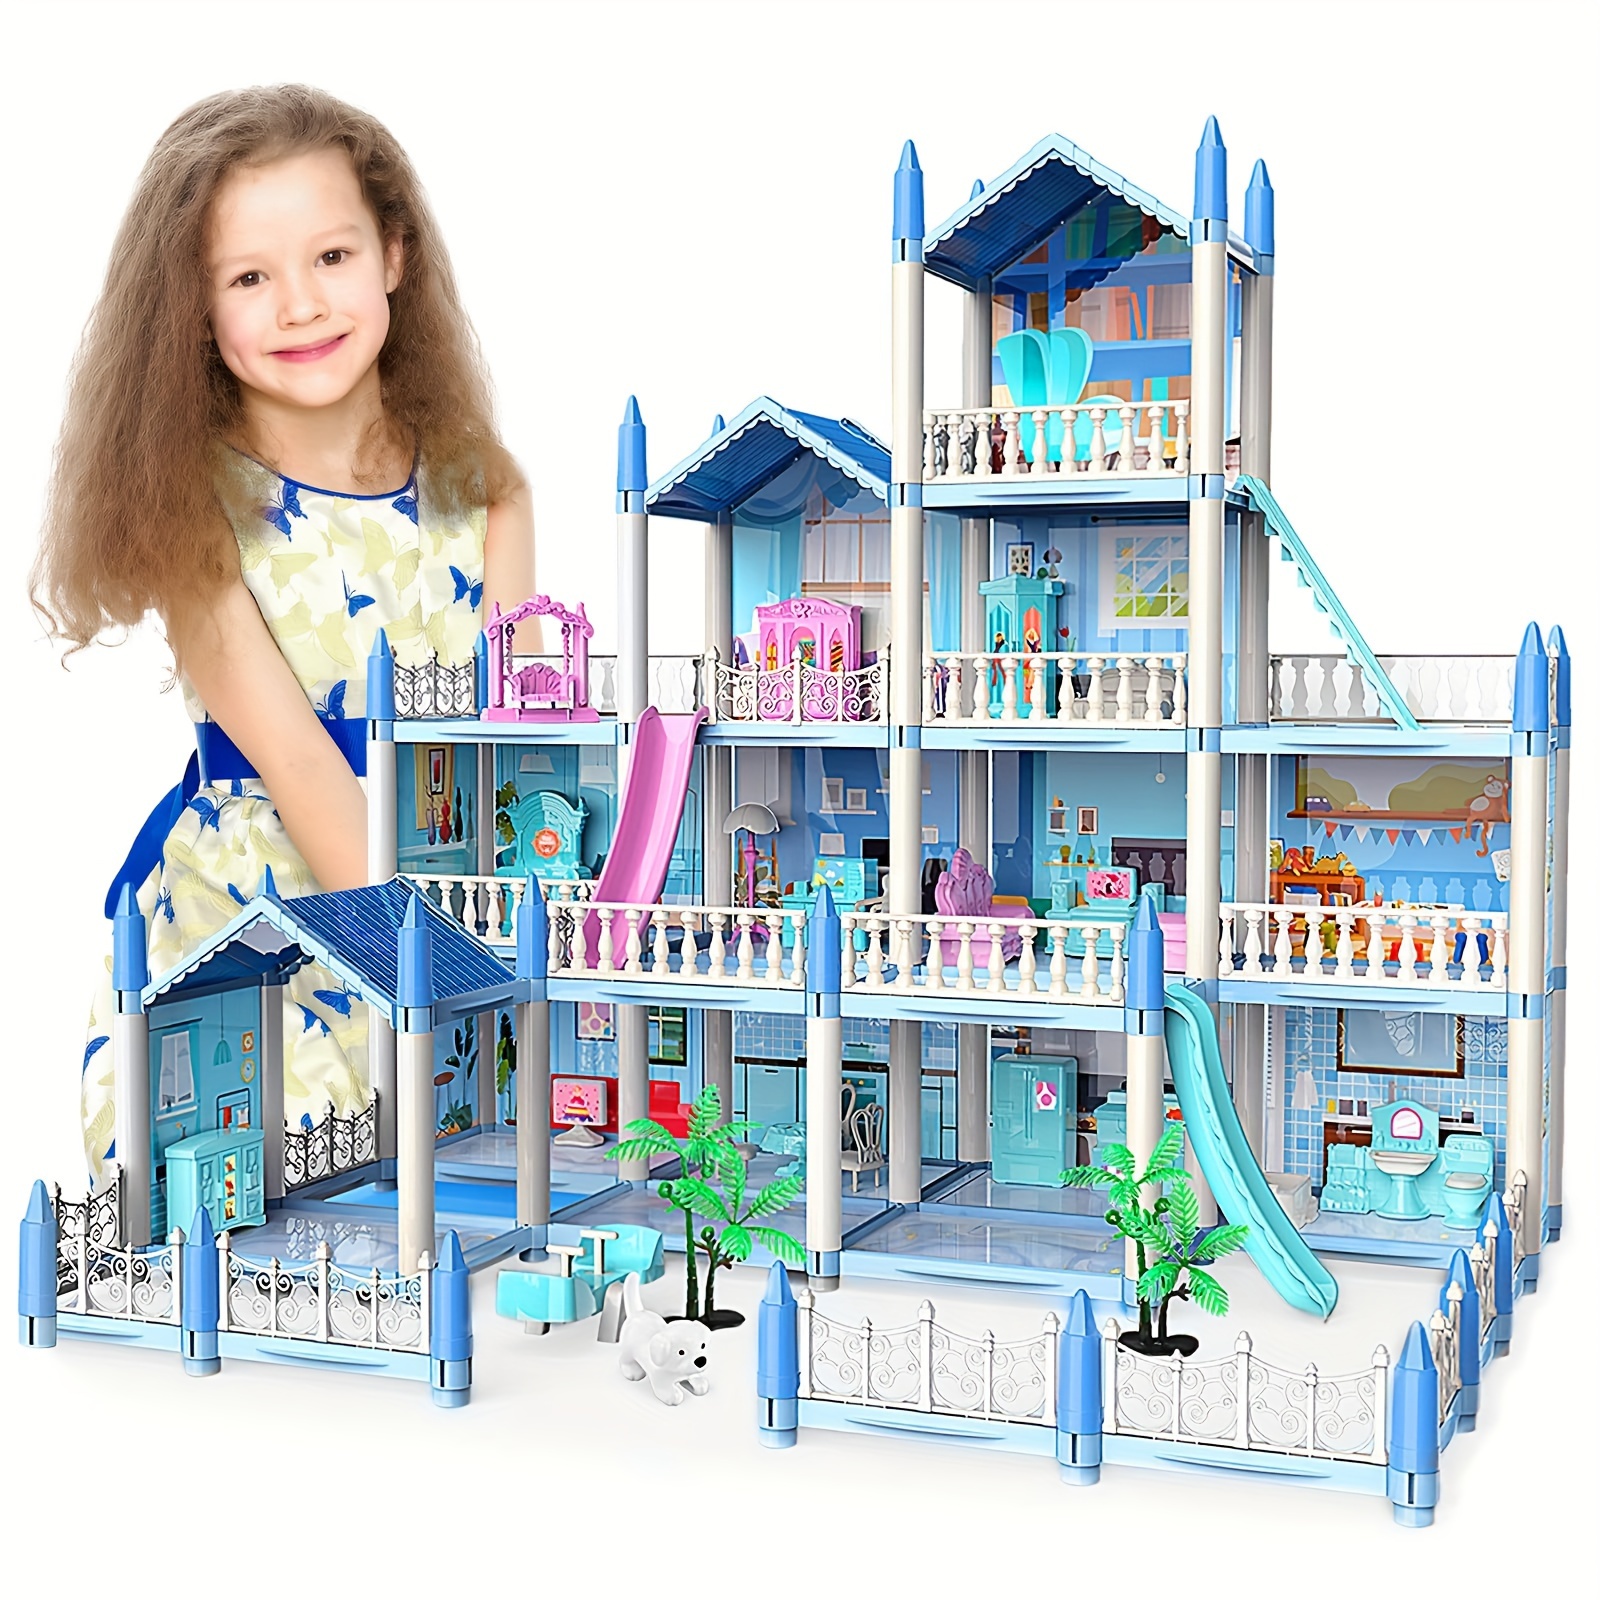 

Doll House For Girls, 14 Rooms Dollhouse With Dolls Figure, Puppies, Furnitures, Accessories, Led Light, Toddler Playhouse Gift For For 3-10 Year Old Girls Toys (blue)